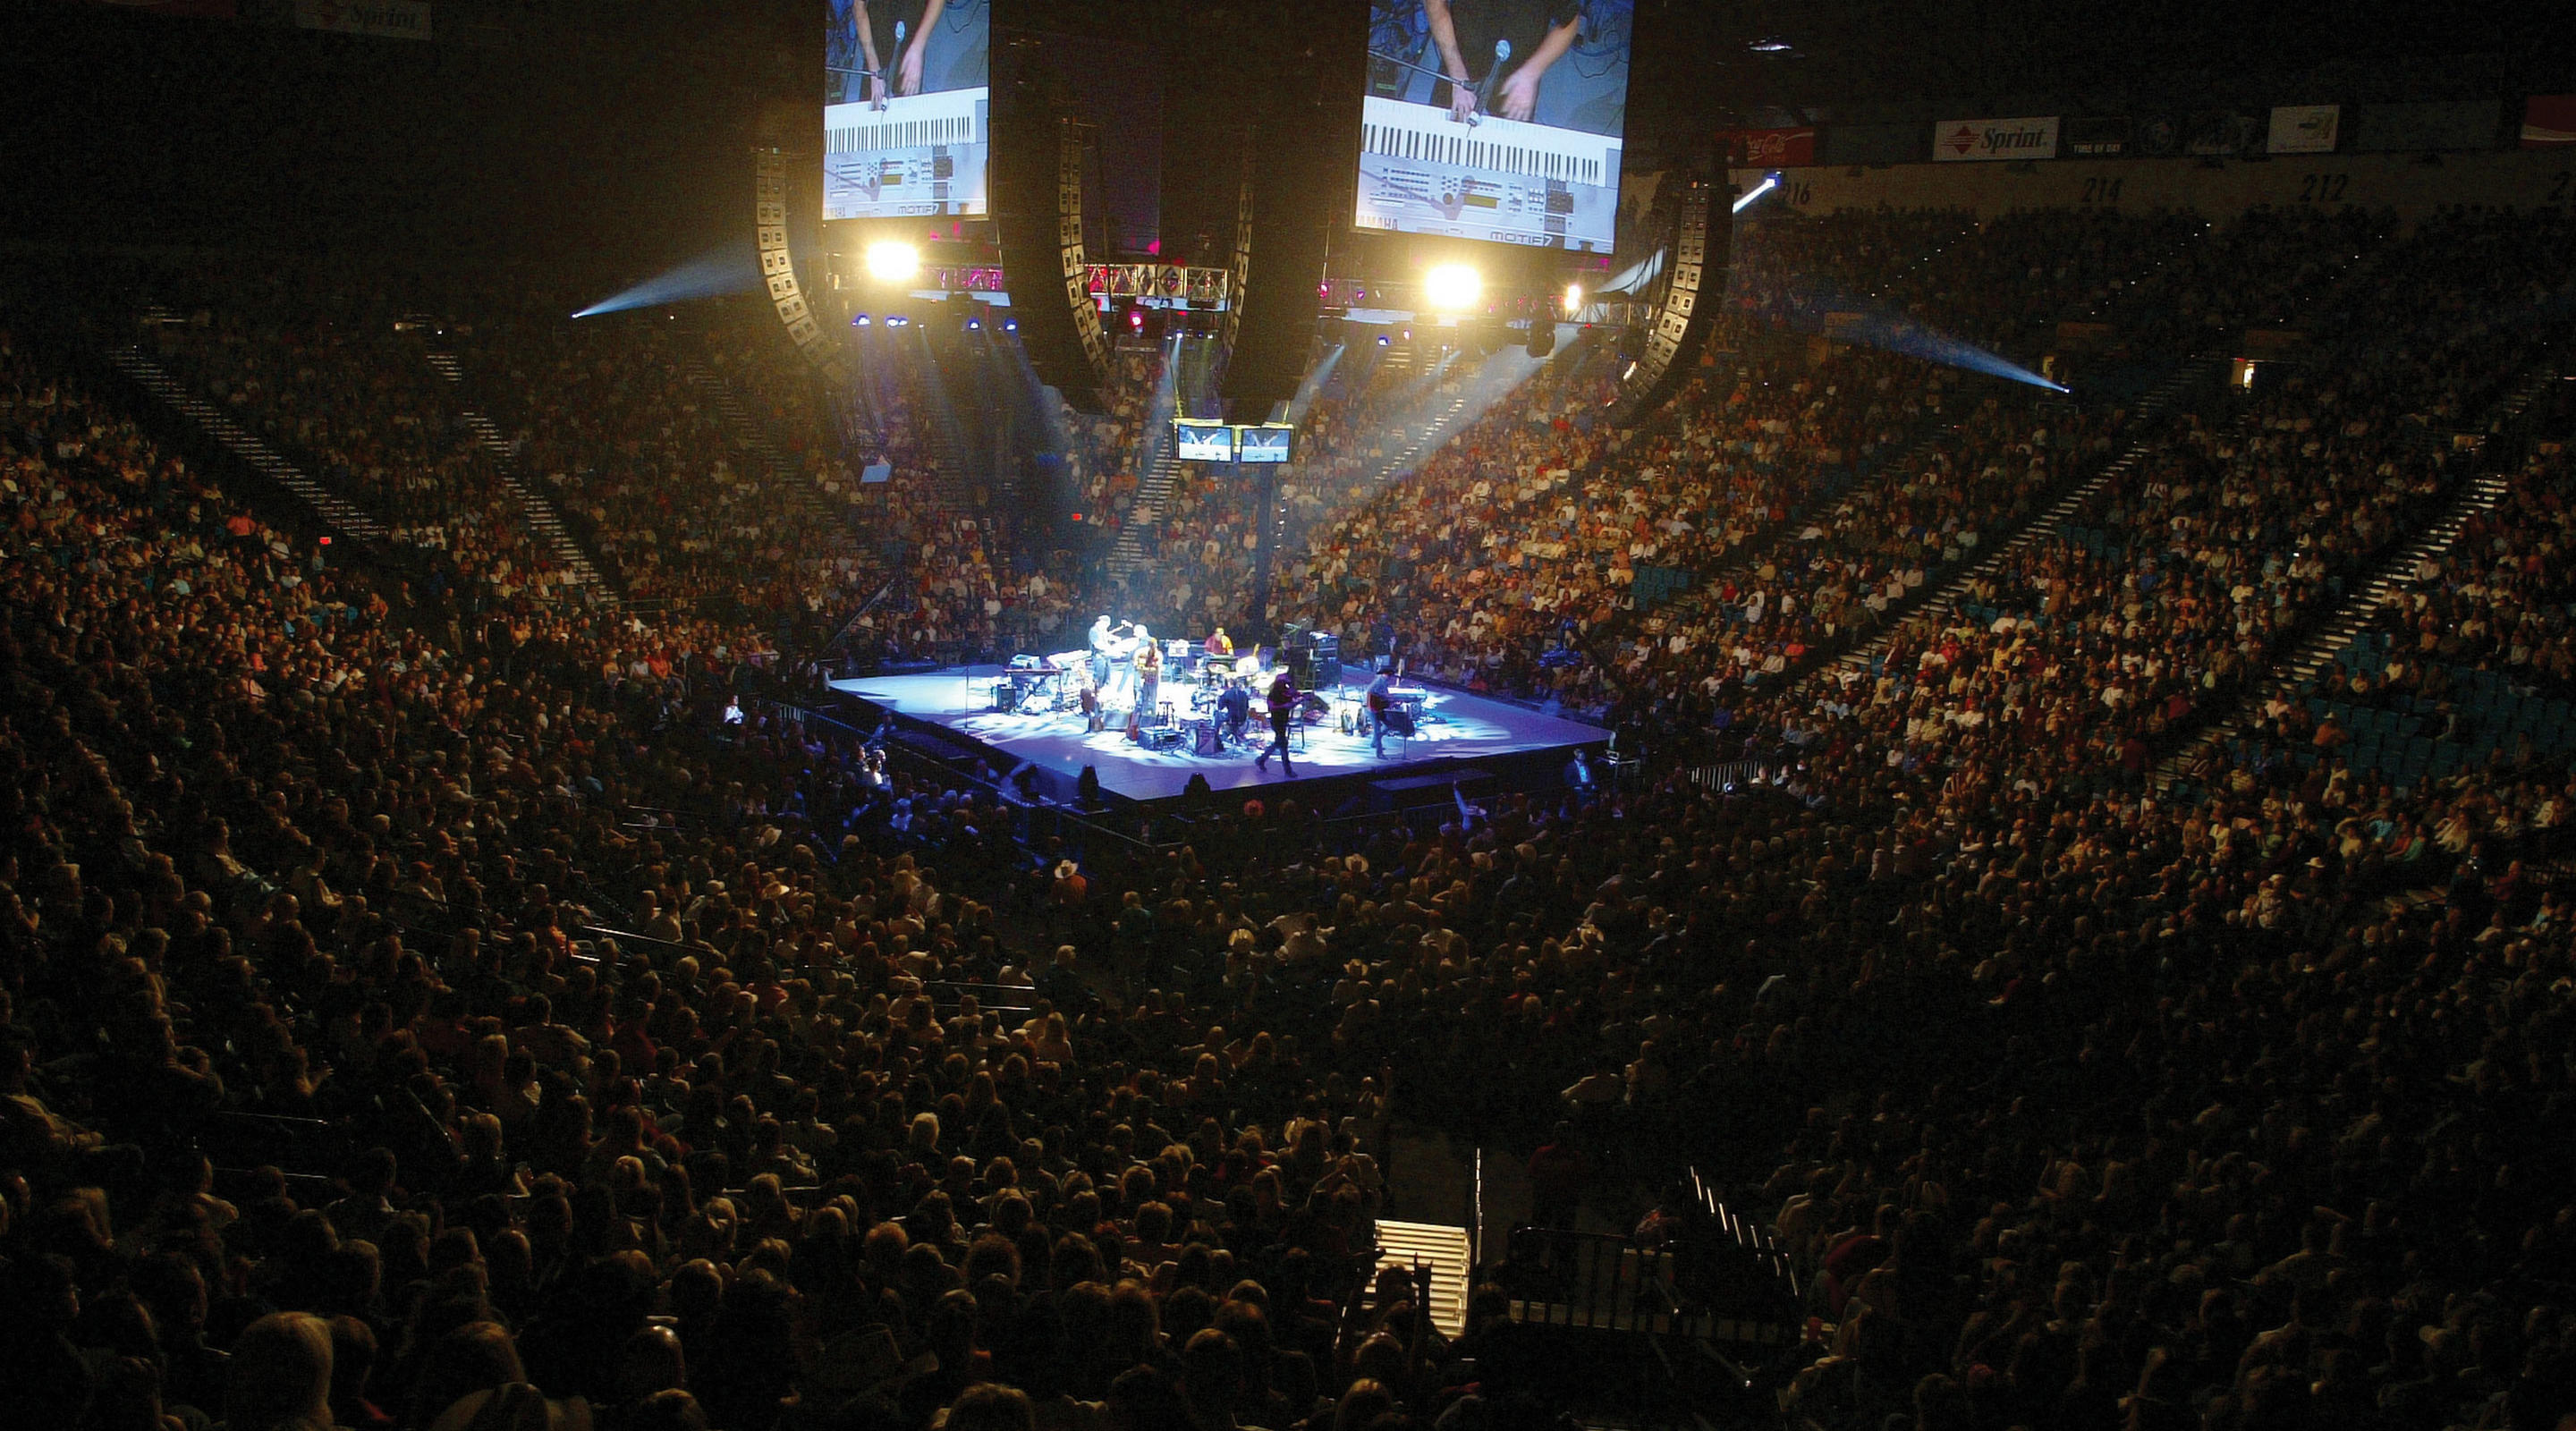 Mgm Arena